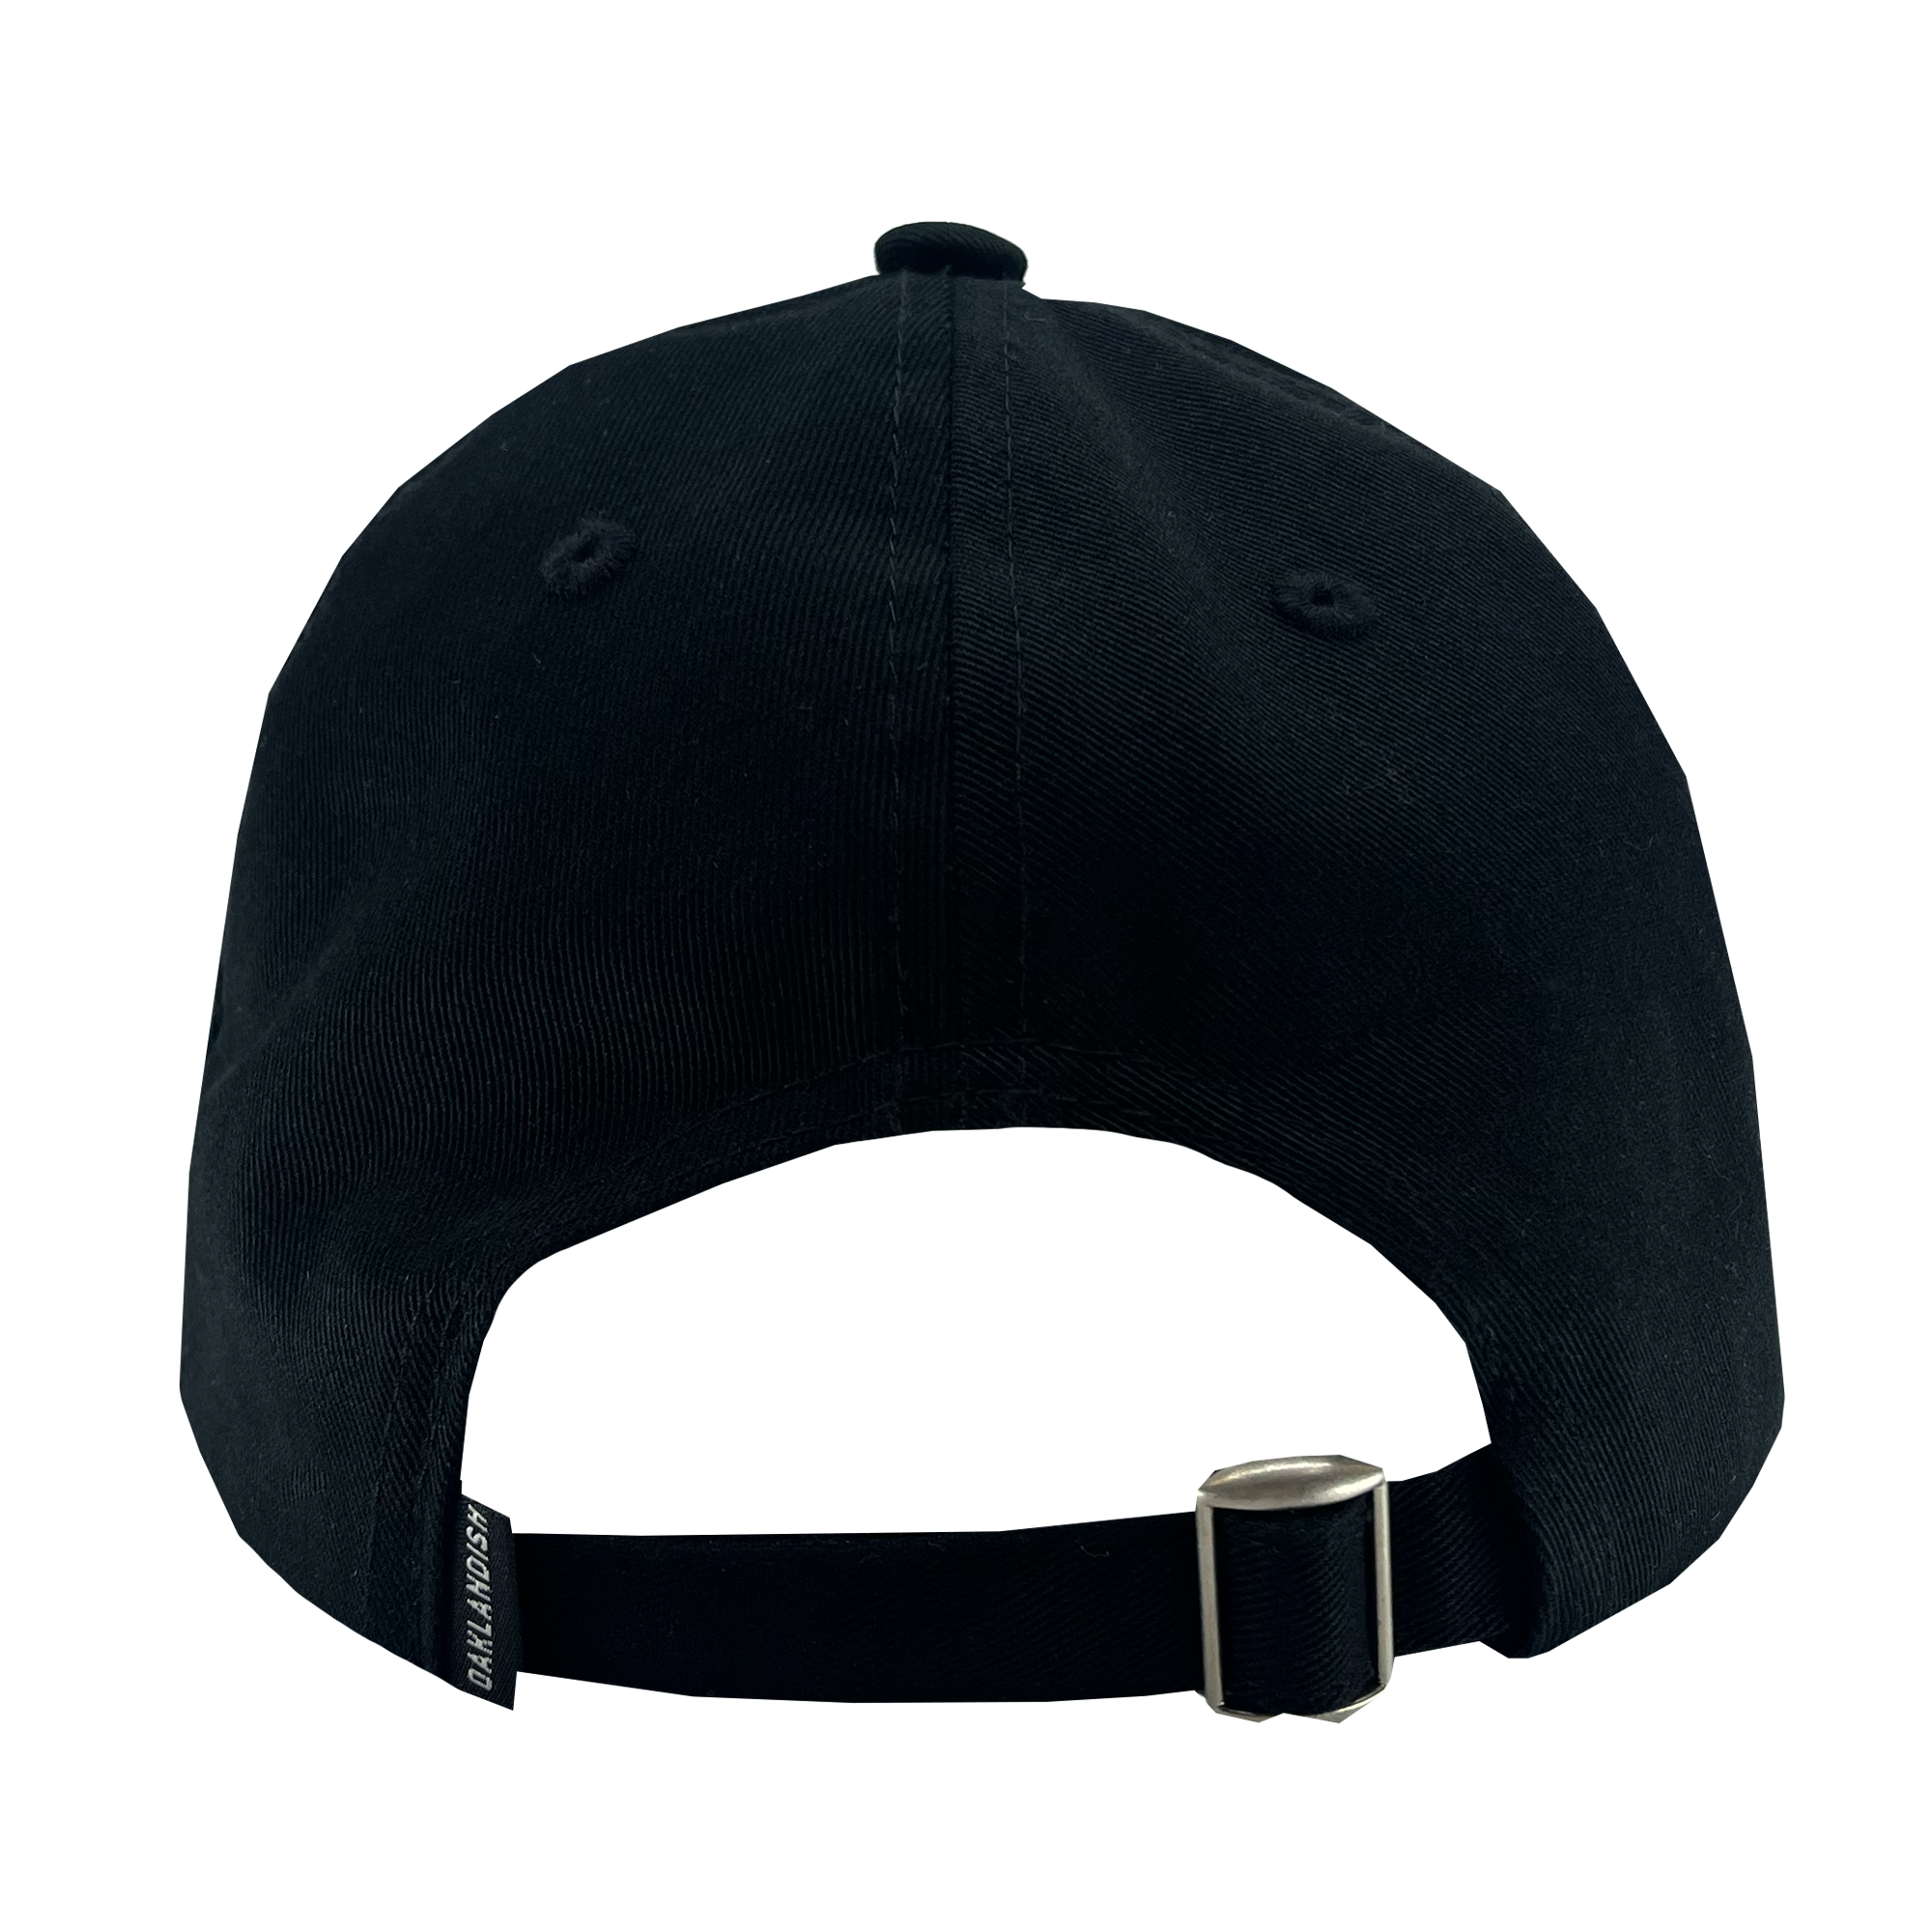 Backside view of black ball cap with adjustable closure and Oaklandish wordmark tag.